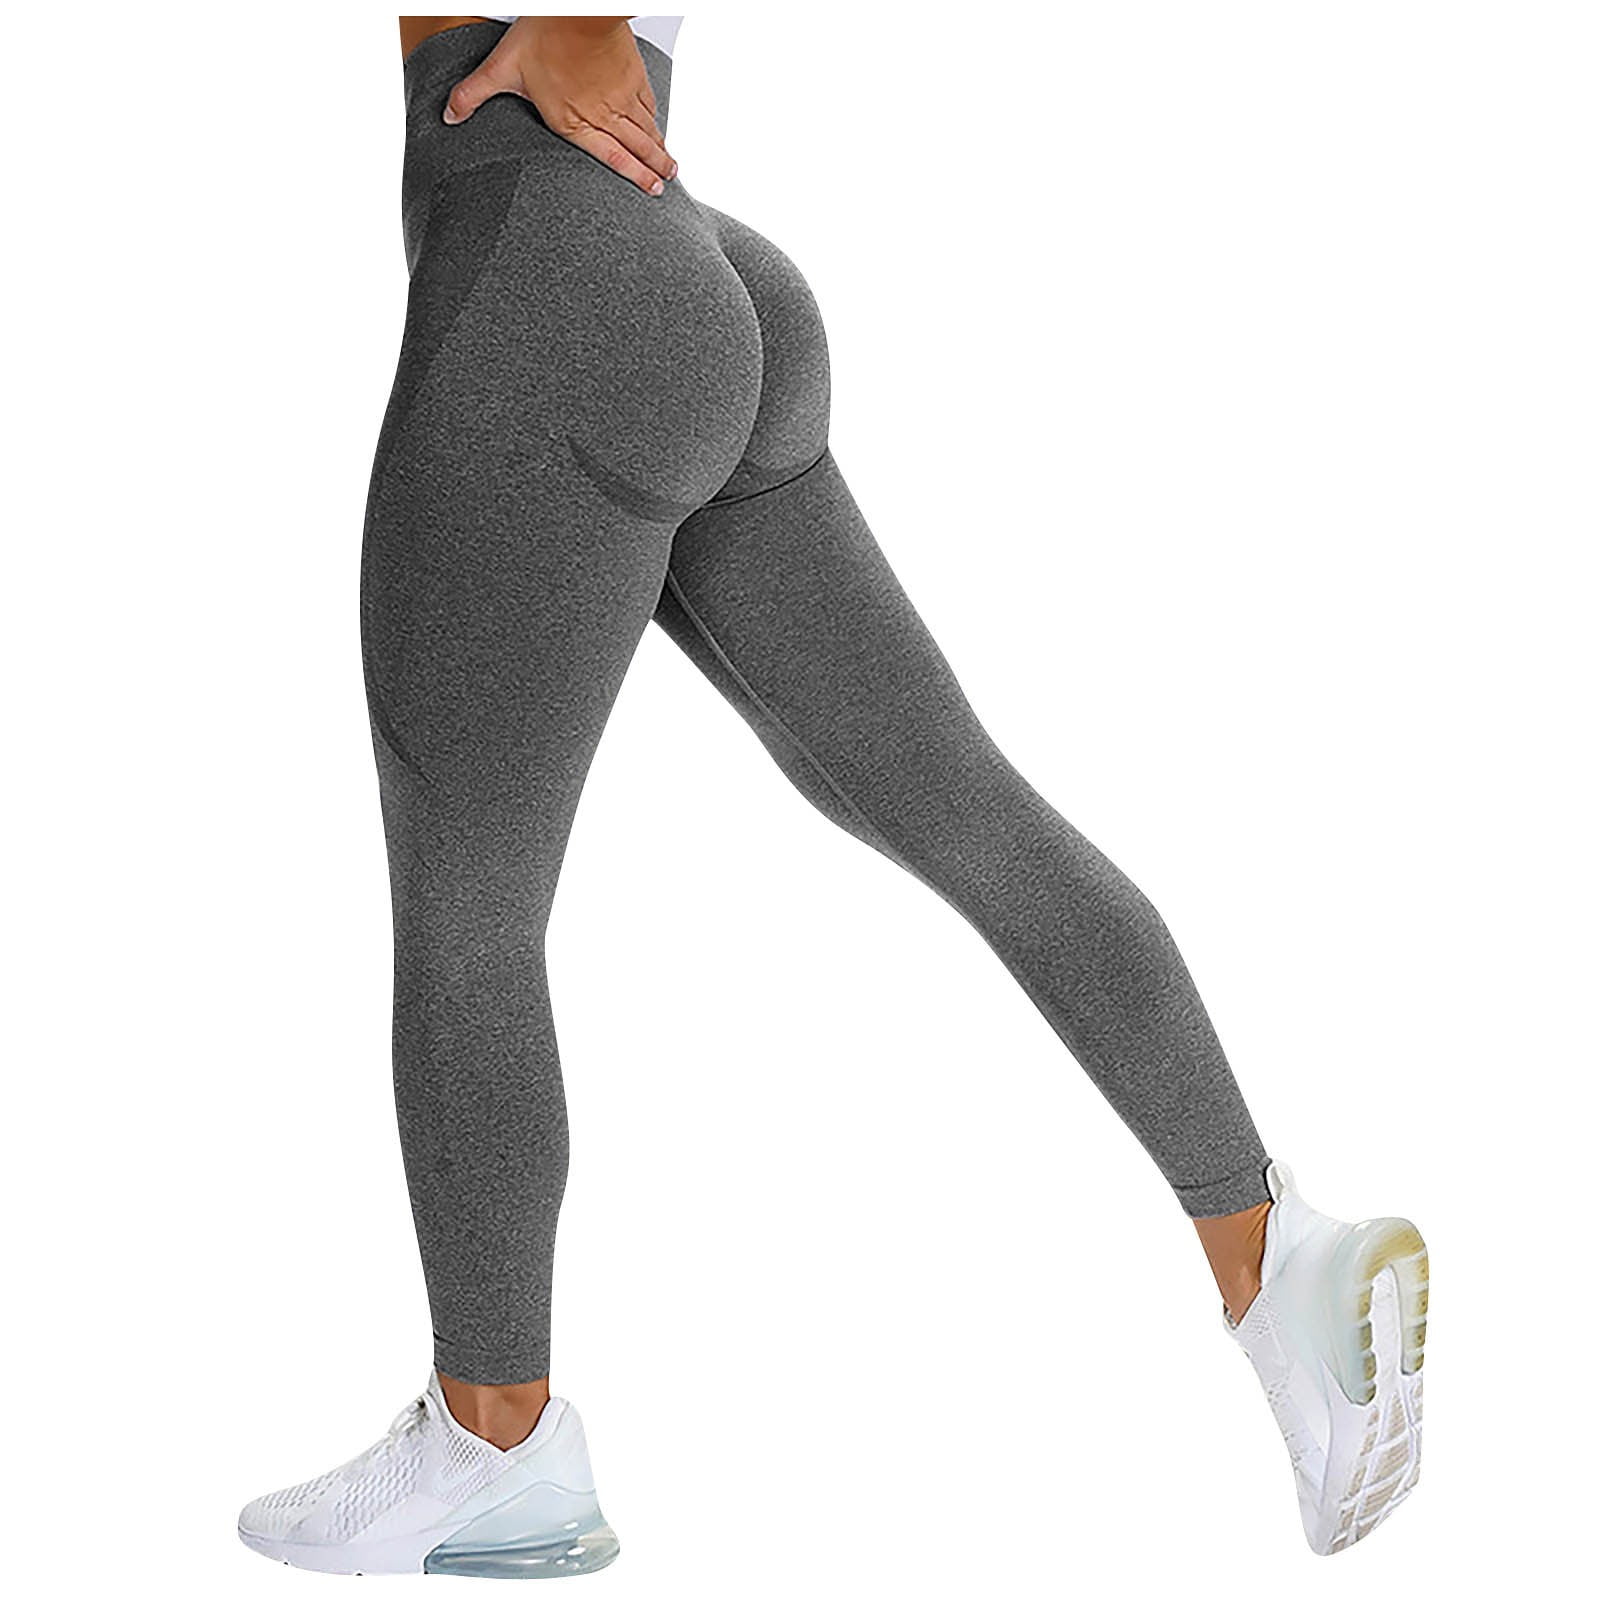 TrainingGirl Mesh Leggings for Women High Waisted Yoga Pants Workout  Running Printed Leggings Gym Sports Tights with Pockets (Grey, X-Large),  Grey, XL price in UAE,  UAE